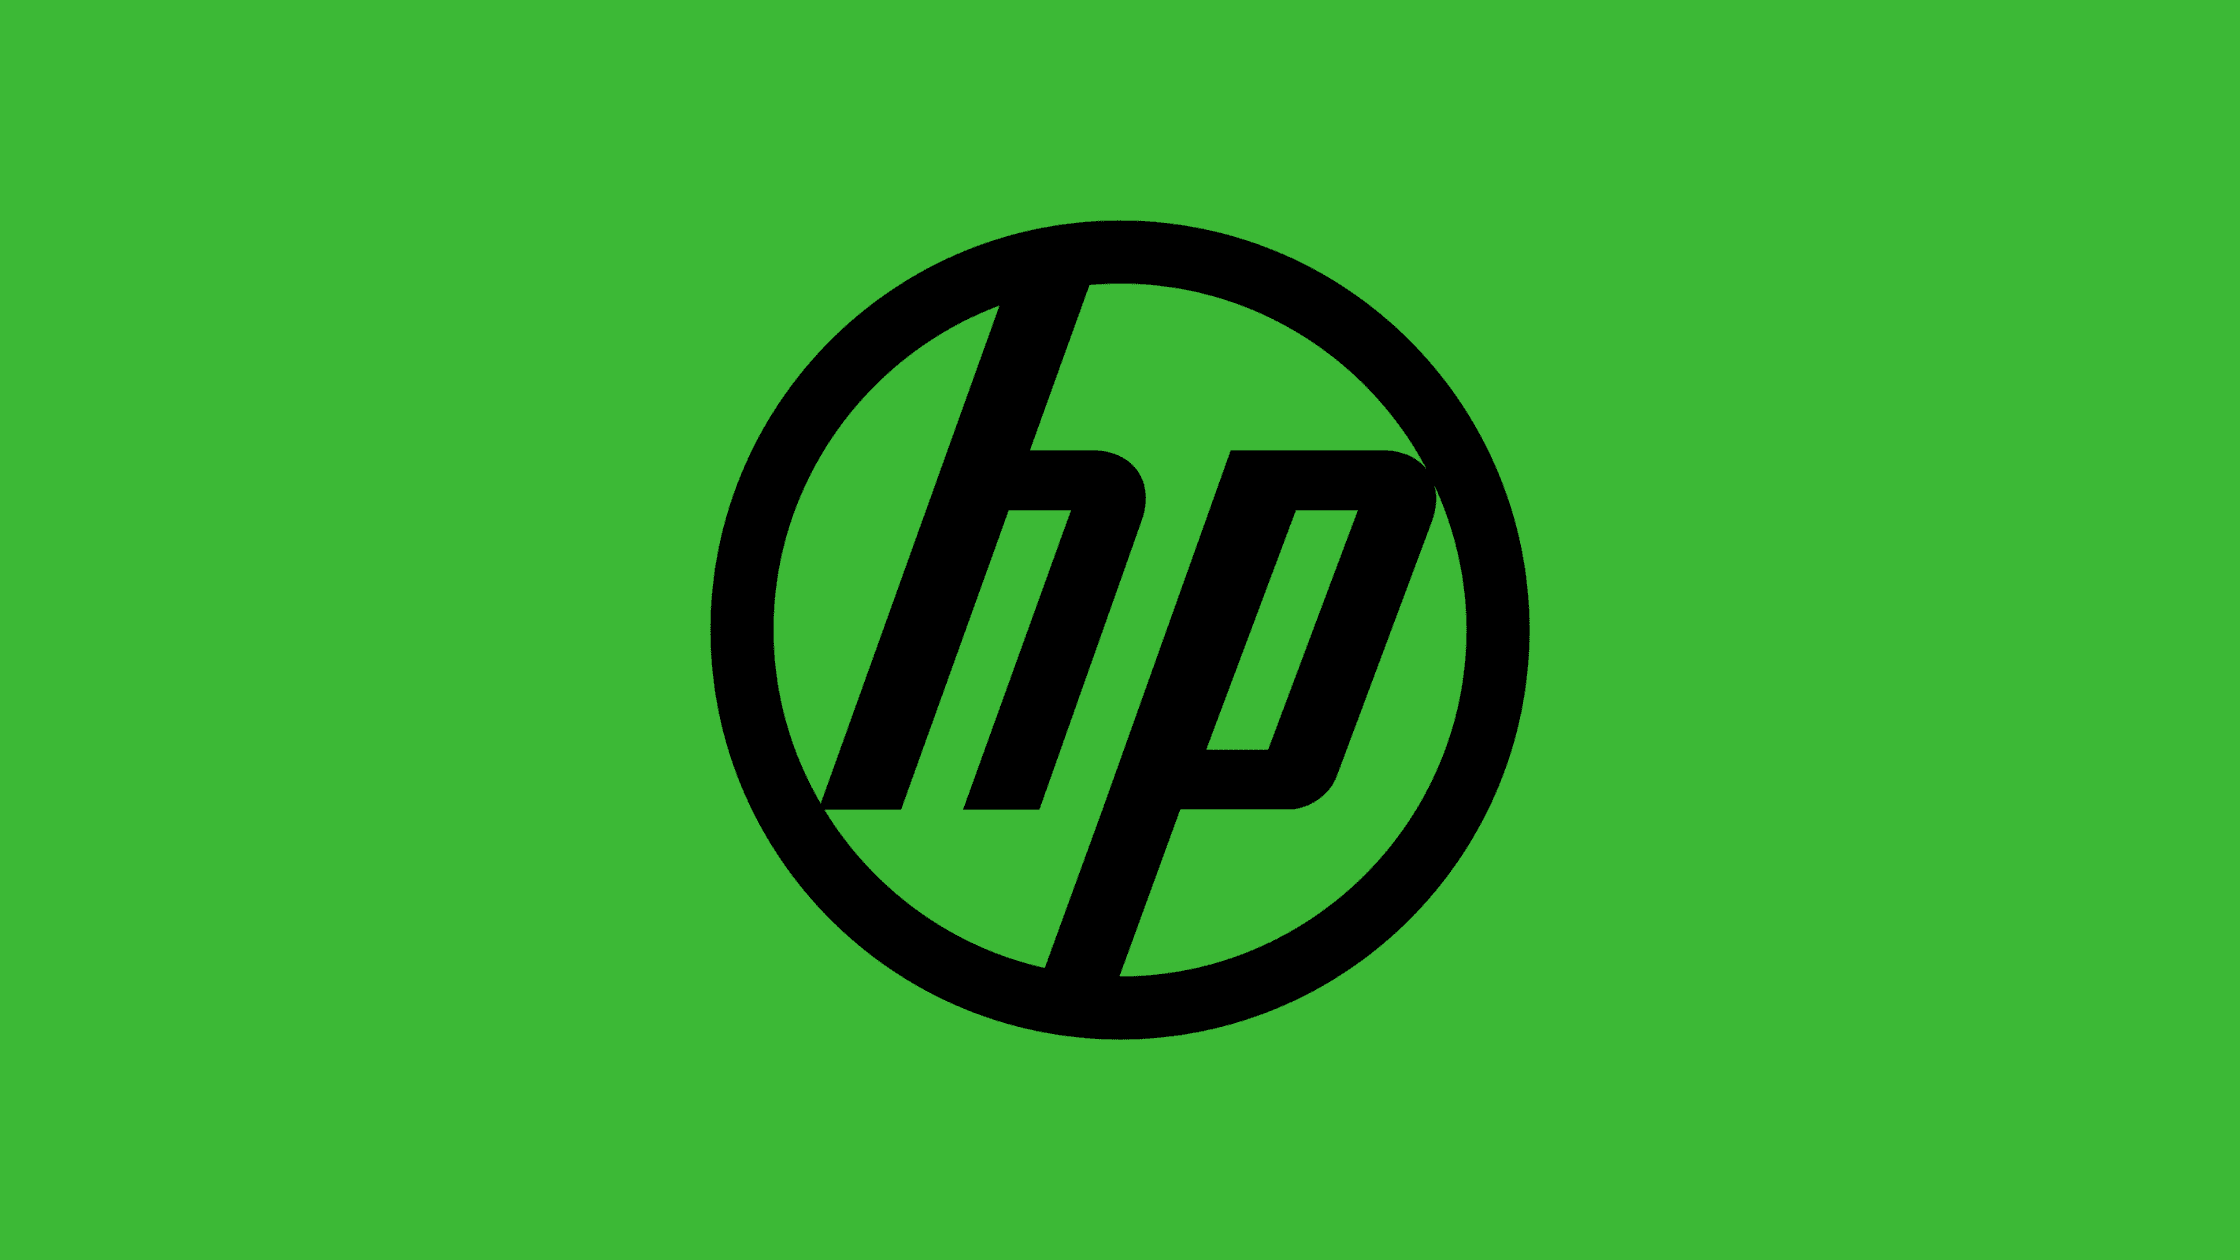 A Critical Rce Vulnerability In Hp Printer Devices Lets See How To Fix Cve 2022 287212